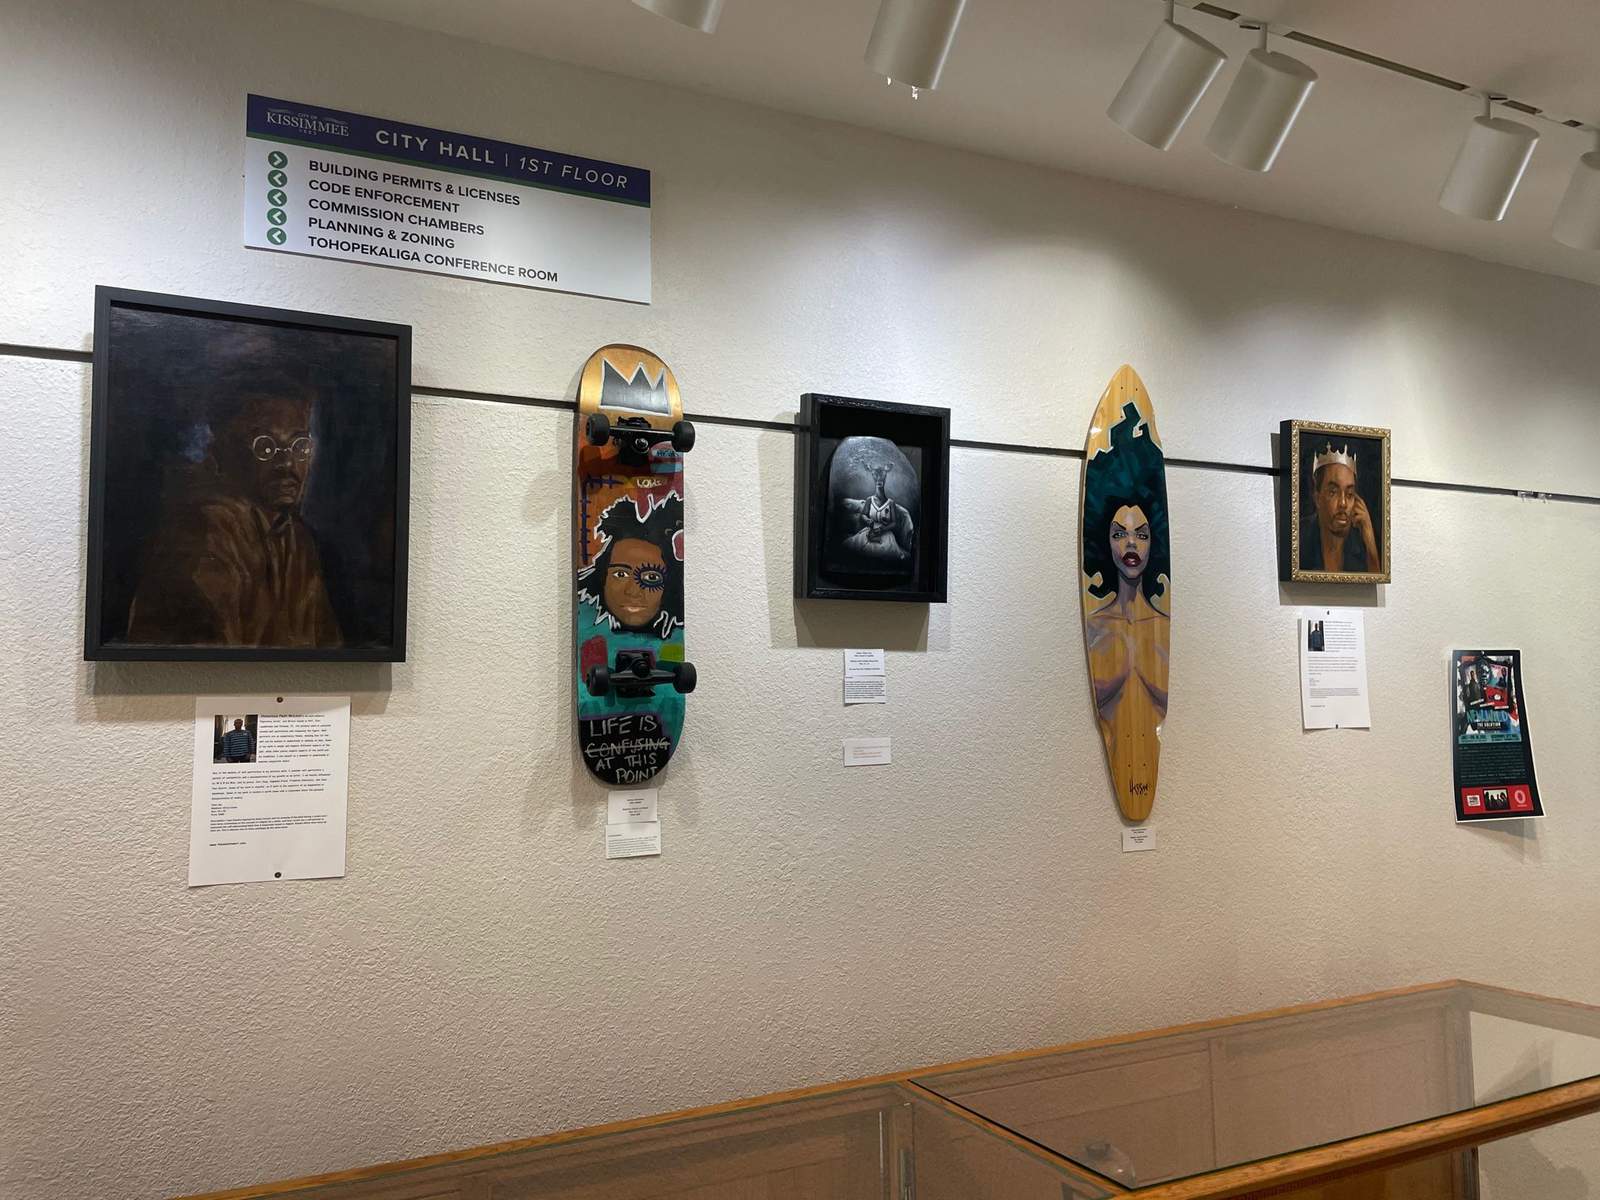 Kissimmee city hall features artist group working to diversify art exhibits in Central Florida